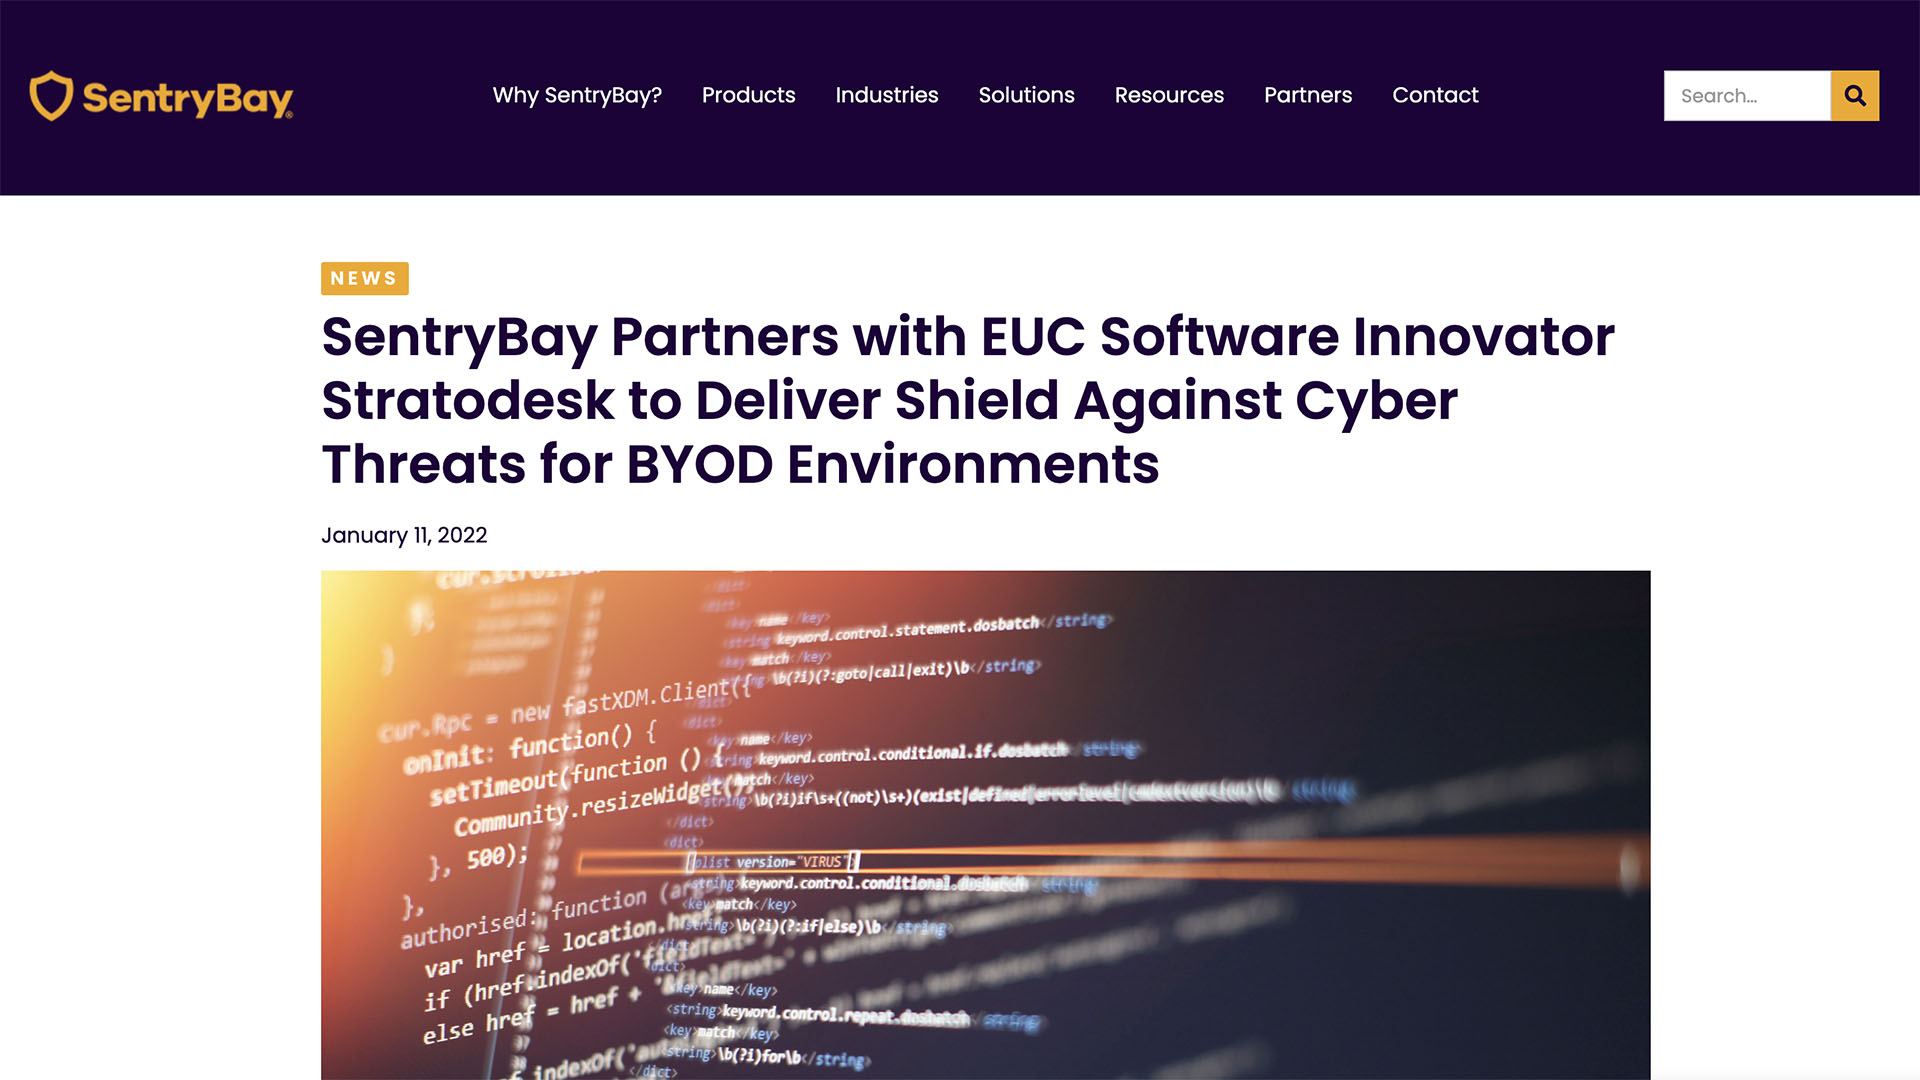 SentryBay Partners with EUC Software Innovator Stratodesk to Deliver Shield Against Cyber Threats for BYOD Environments